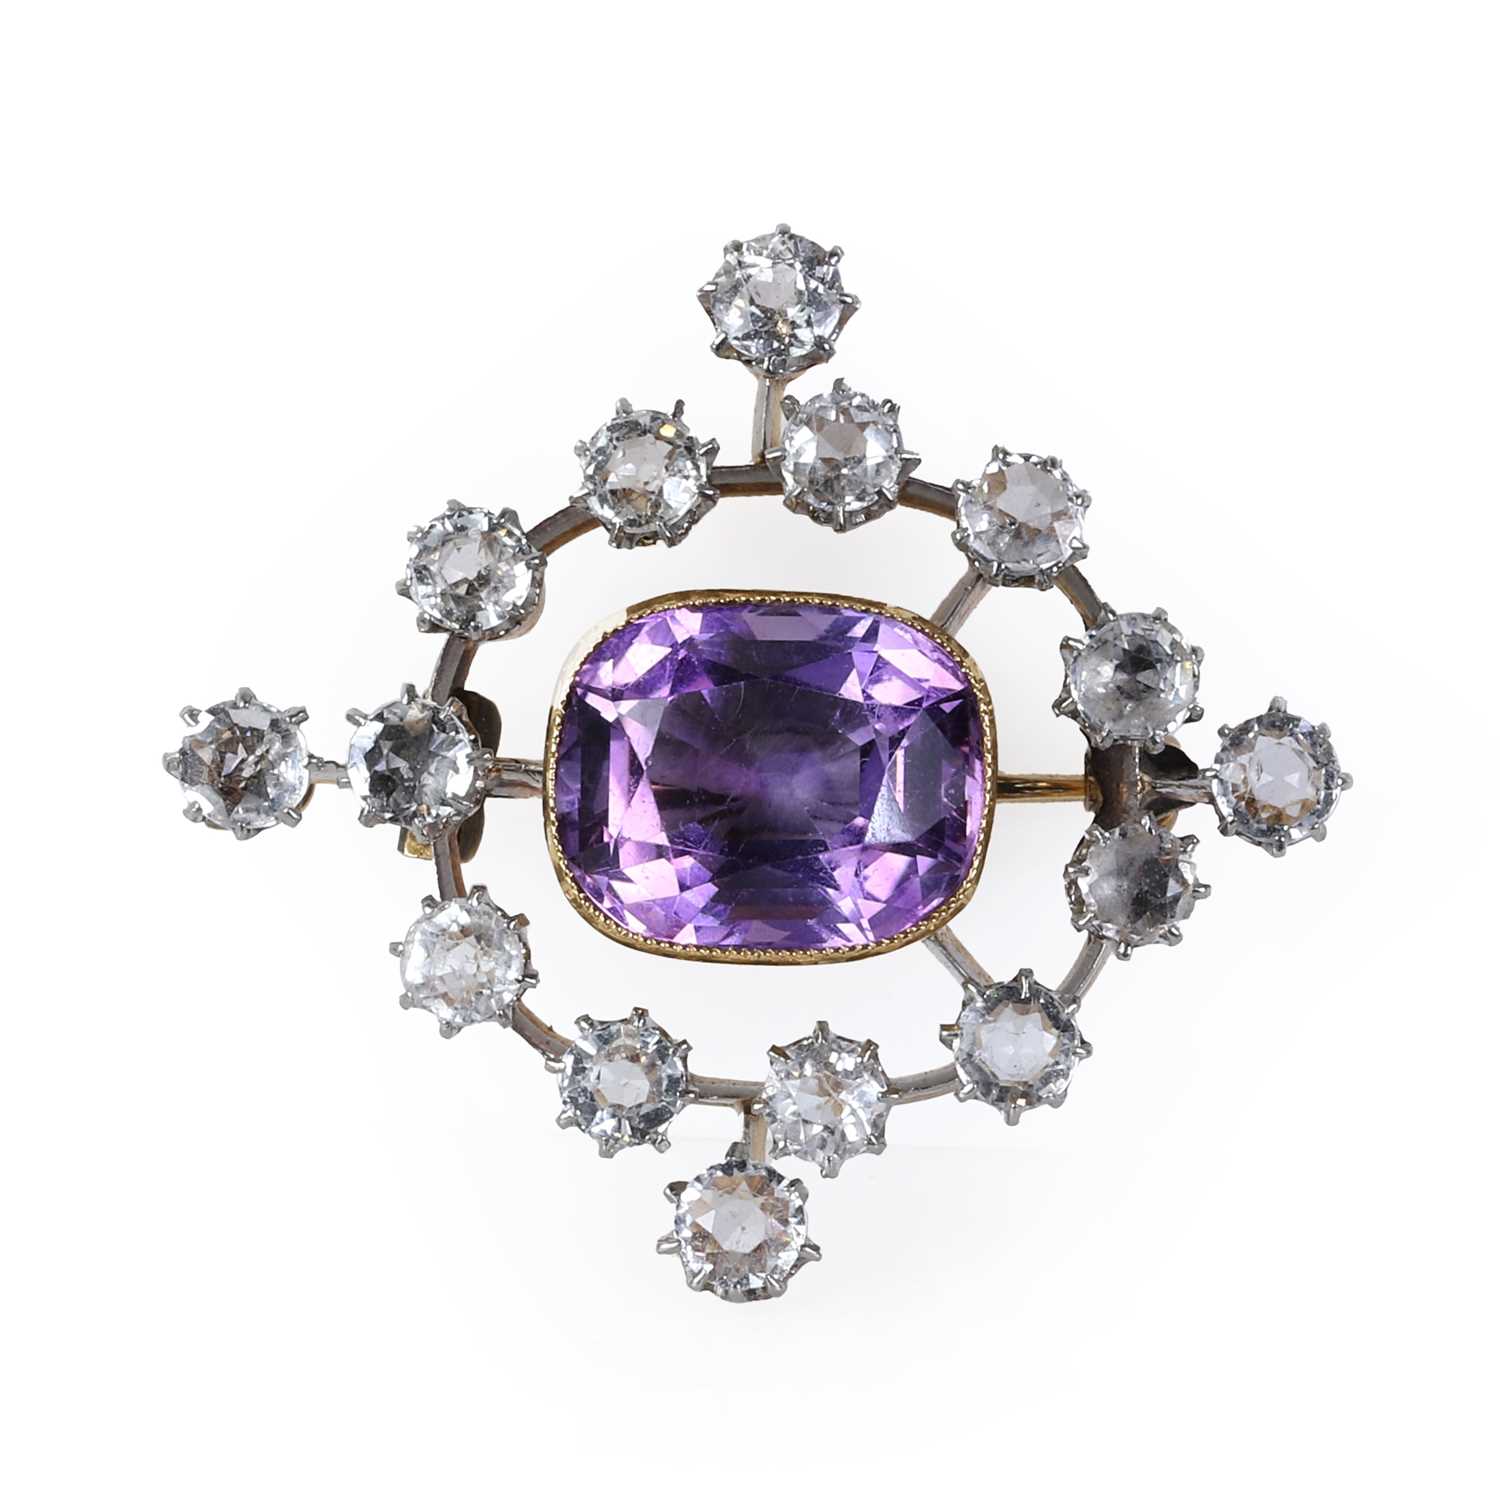 Lot 47 - An Edwardian amethyst and white topaz brooch/pendant